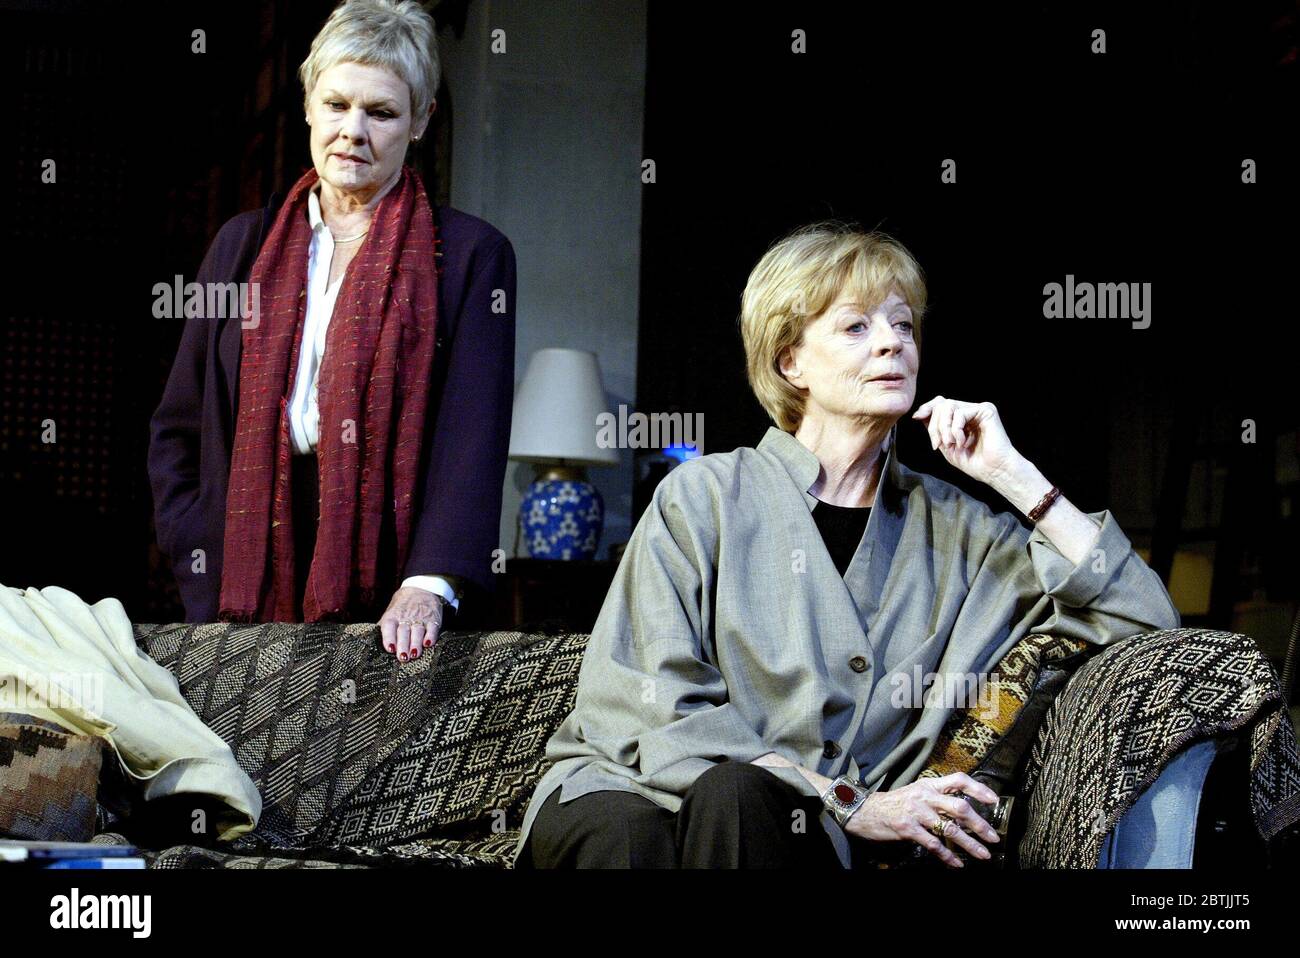 l-r: Judi Dench (Frances Beale), Maggie Smith (Madeleine Palmer) in THE BREATH OF LIFE by David Hare at the Theatre Royal Haymarket, London SW1 15/10/2002  set design: William Dudley  costumes: Jenny Beavan  lighting: Hugh Vanstone  director: Howard Davies Stock Photo